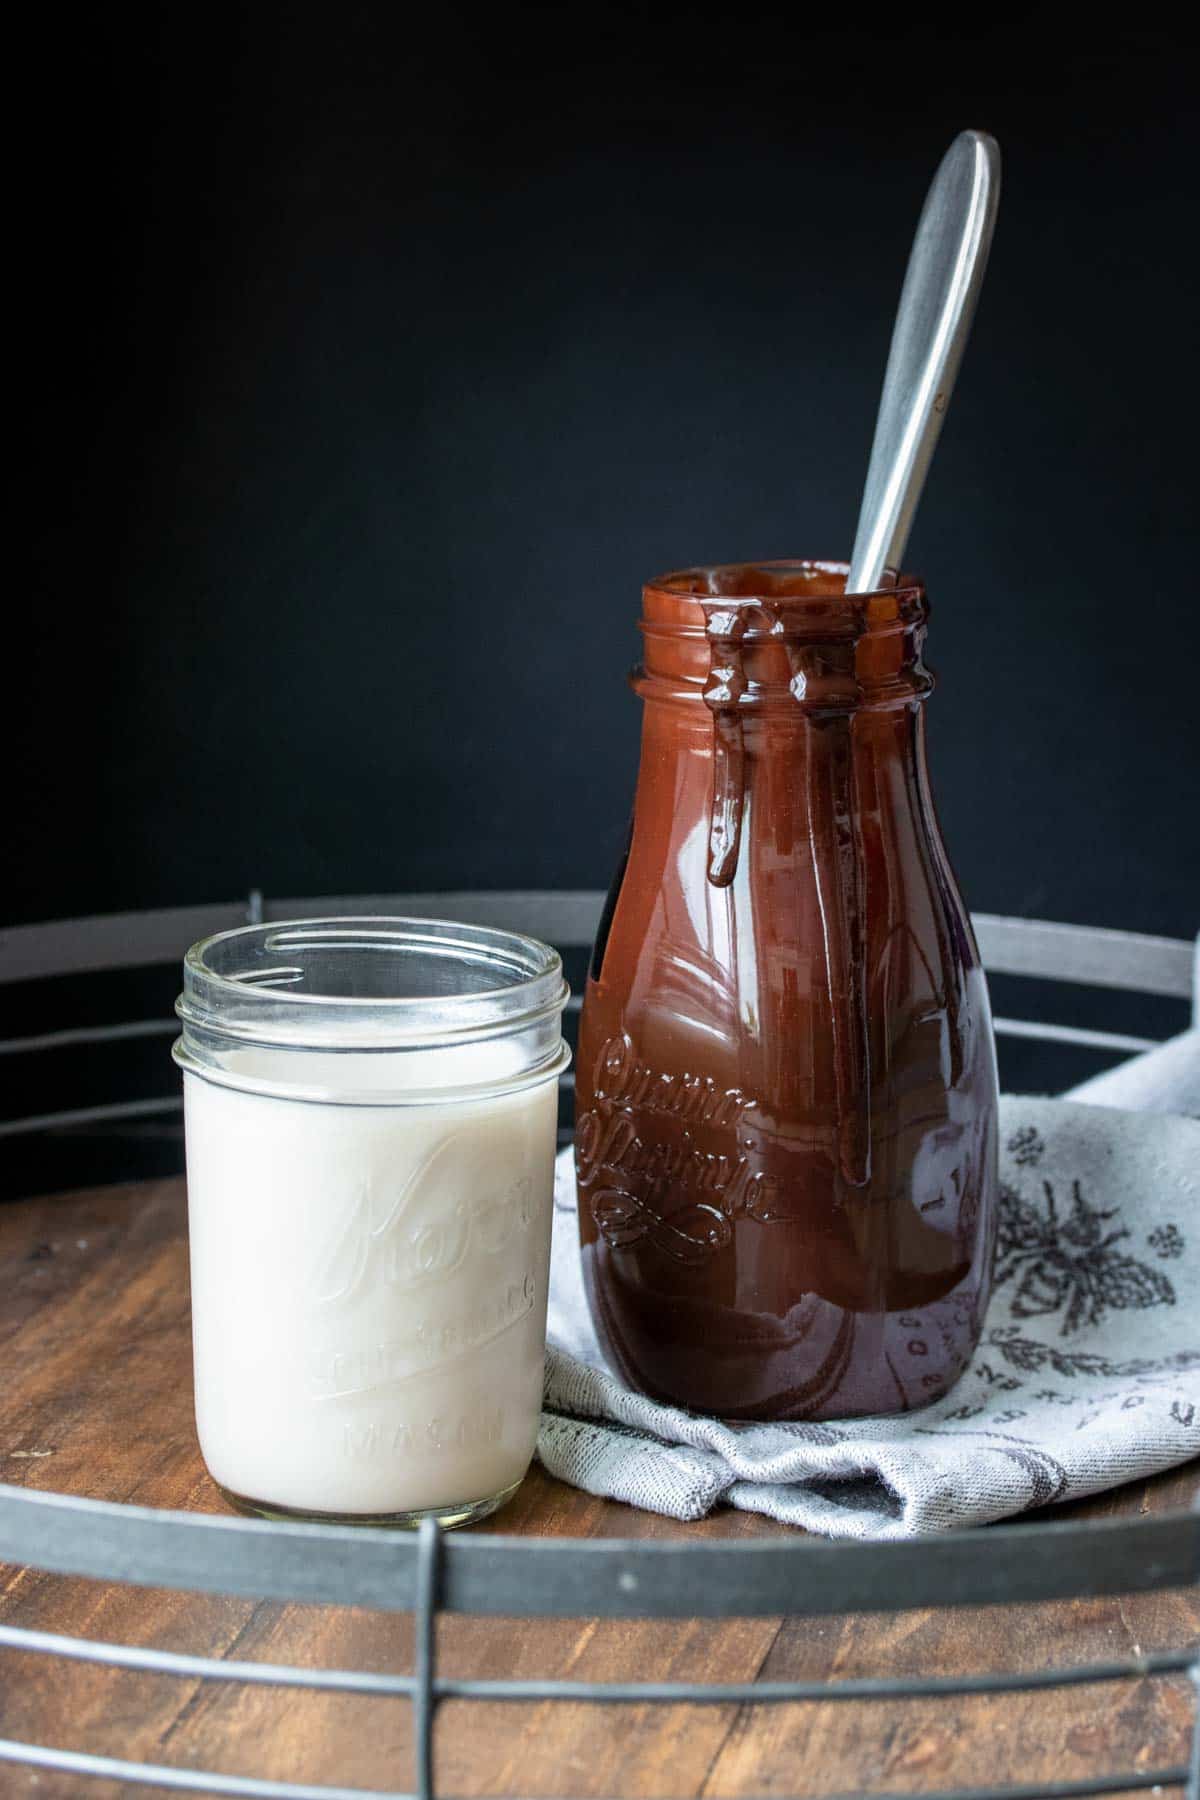 Glass of milk next to a tall glass bottle of chocolate syrup